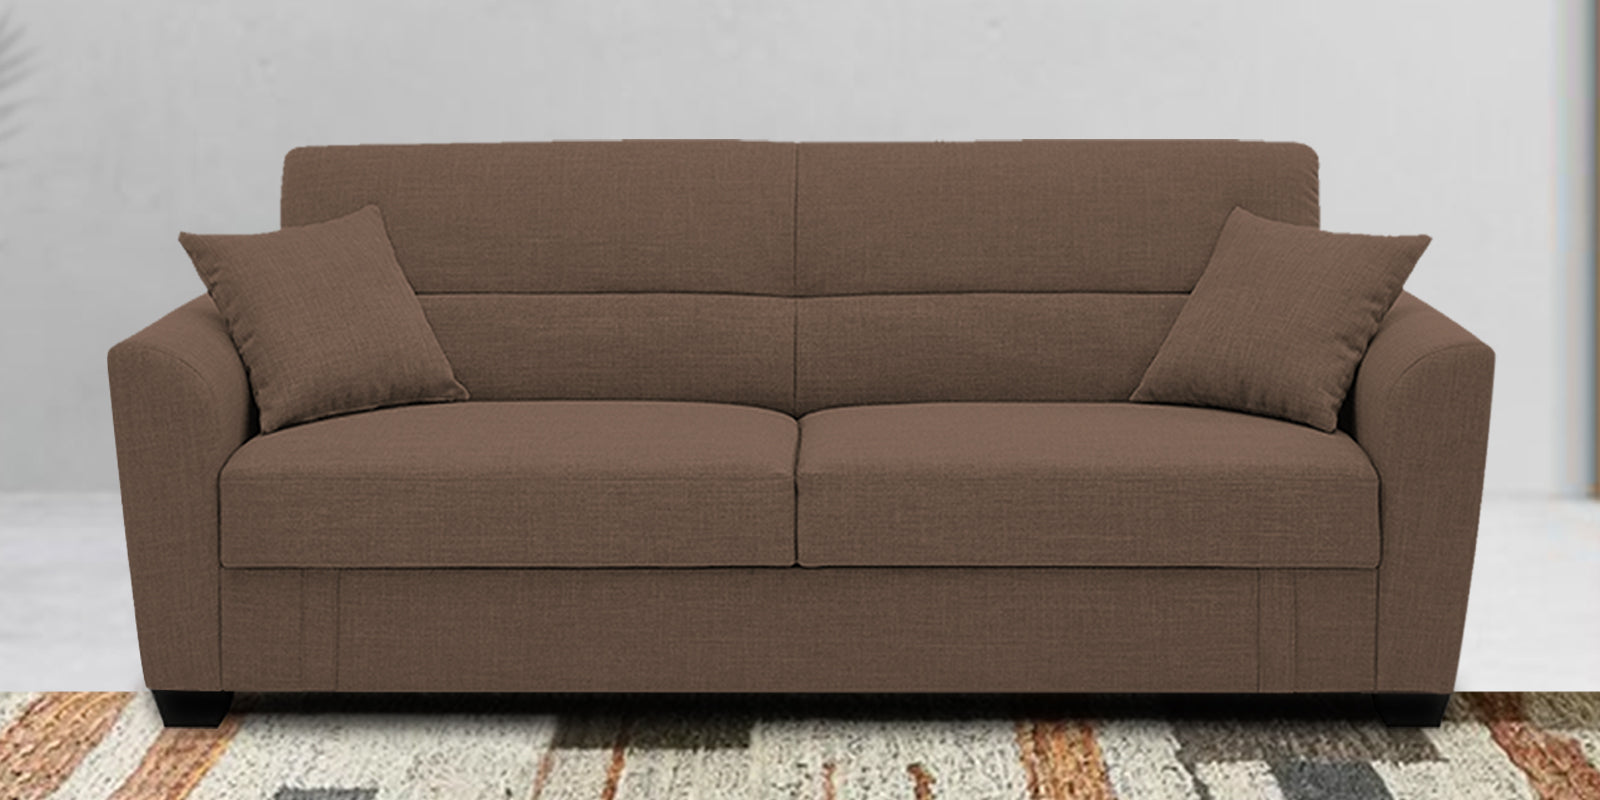 Bony Fabric 3 Seater Convertable Sofa Cum Bed In Ginger Brown Colour